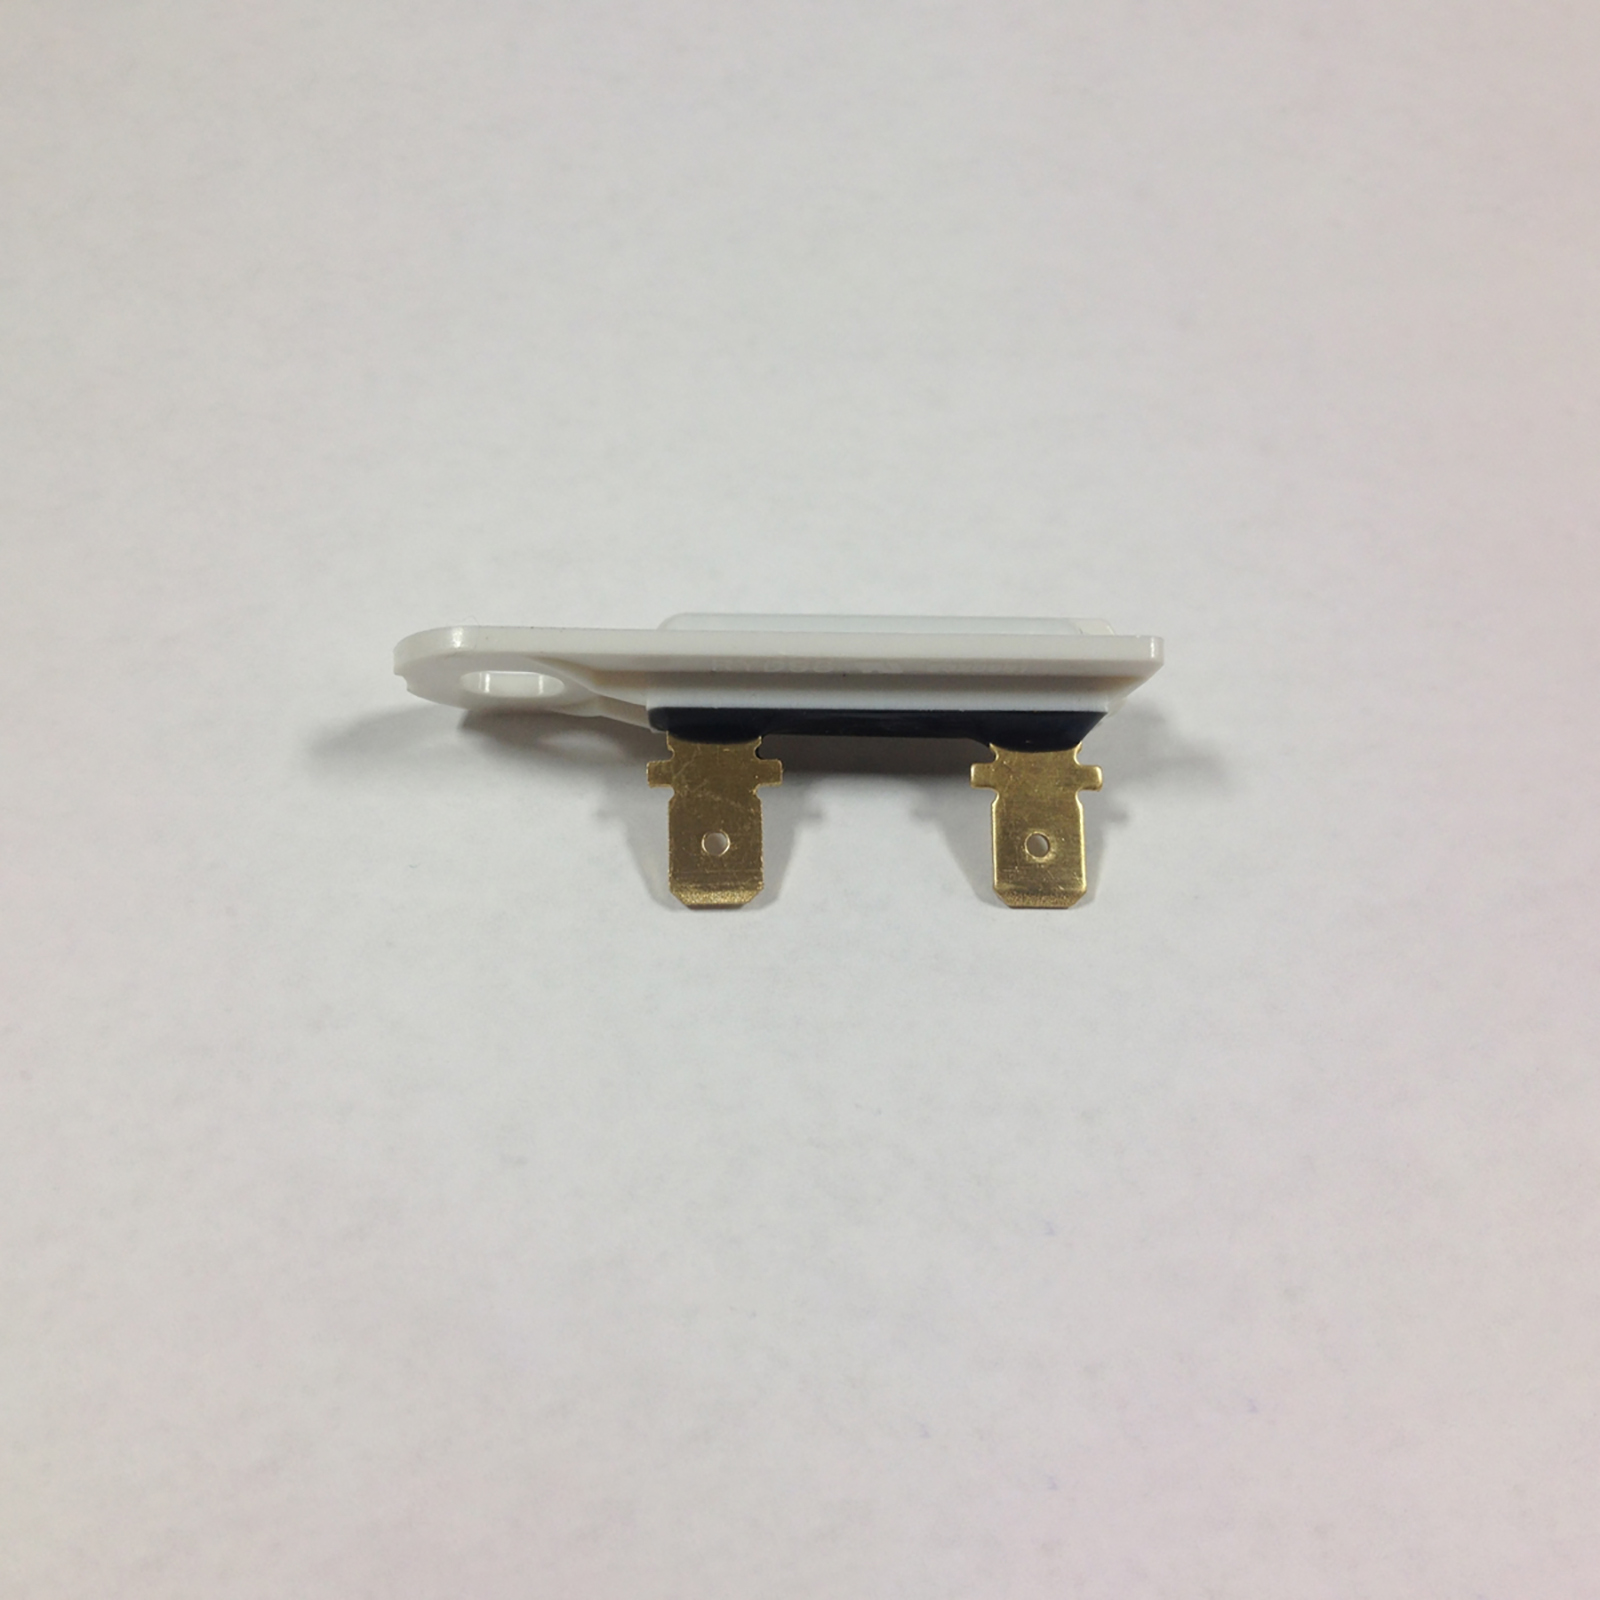 EDGEWATER PARTS 3399849 Thermal Fuse for Maytag Dryers - White